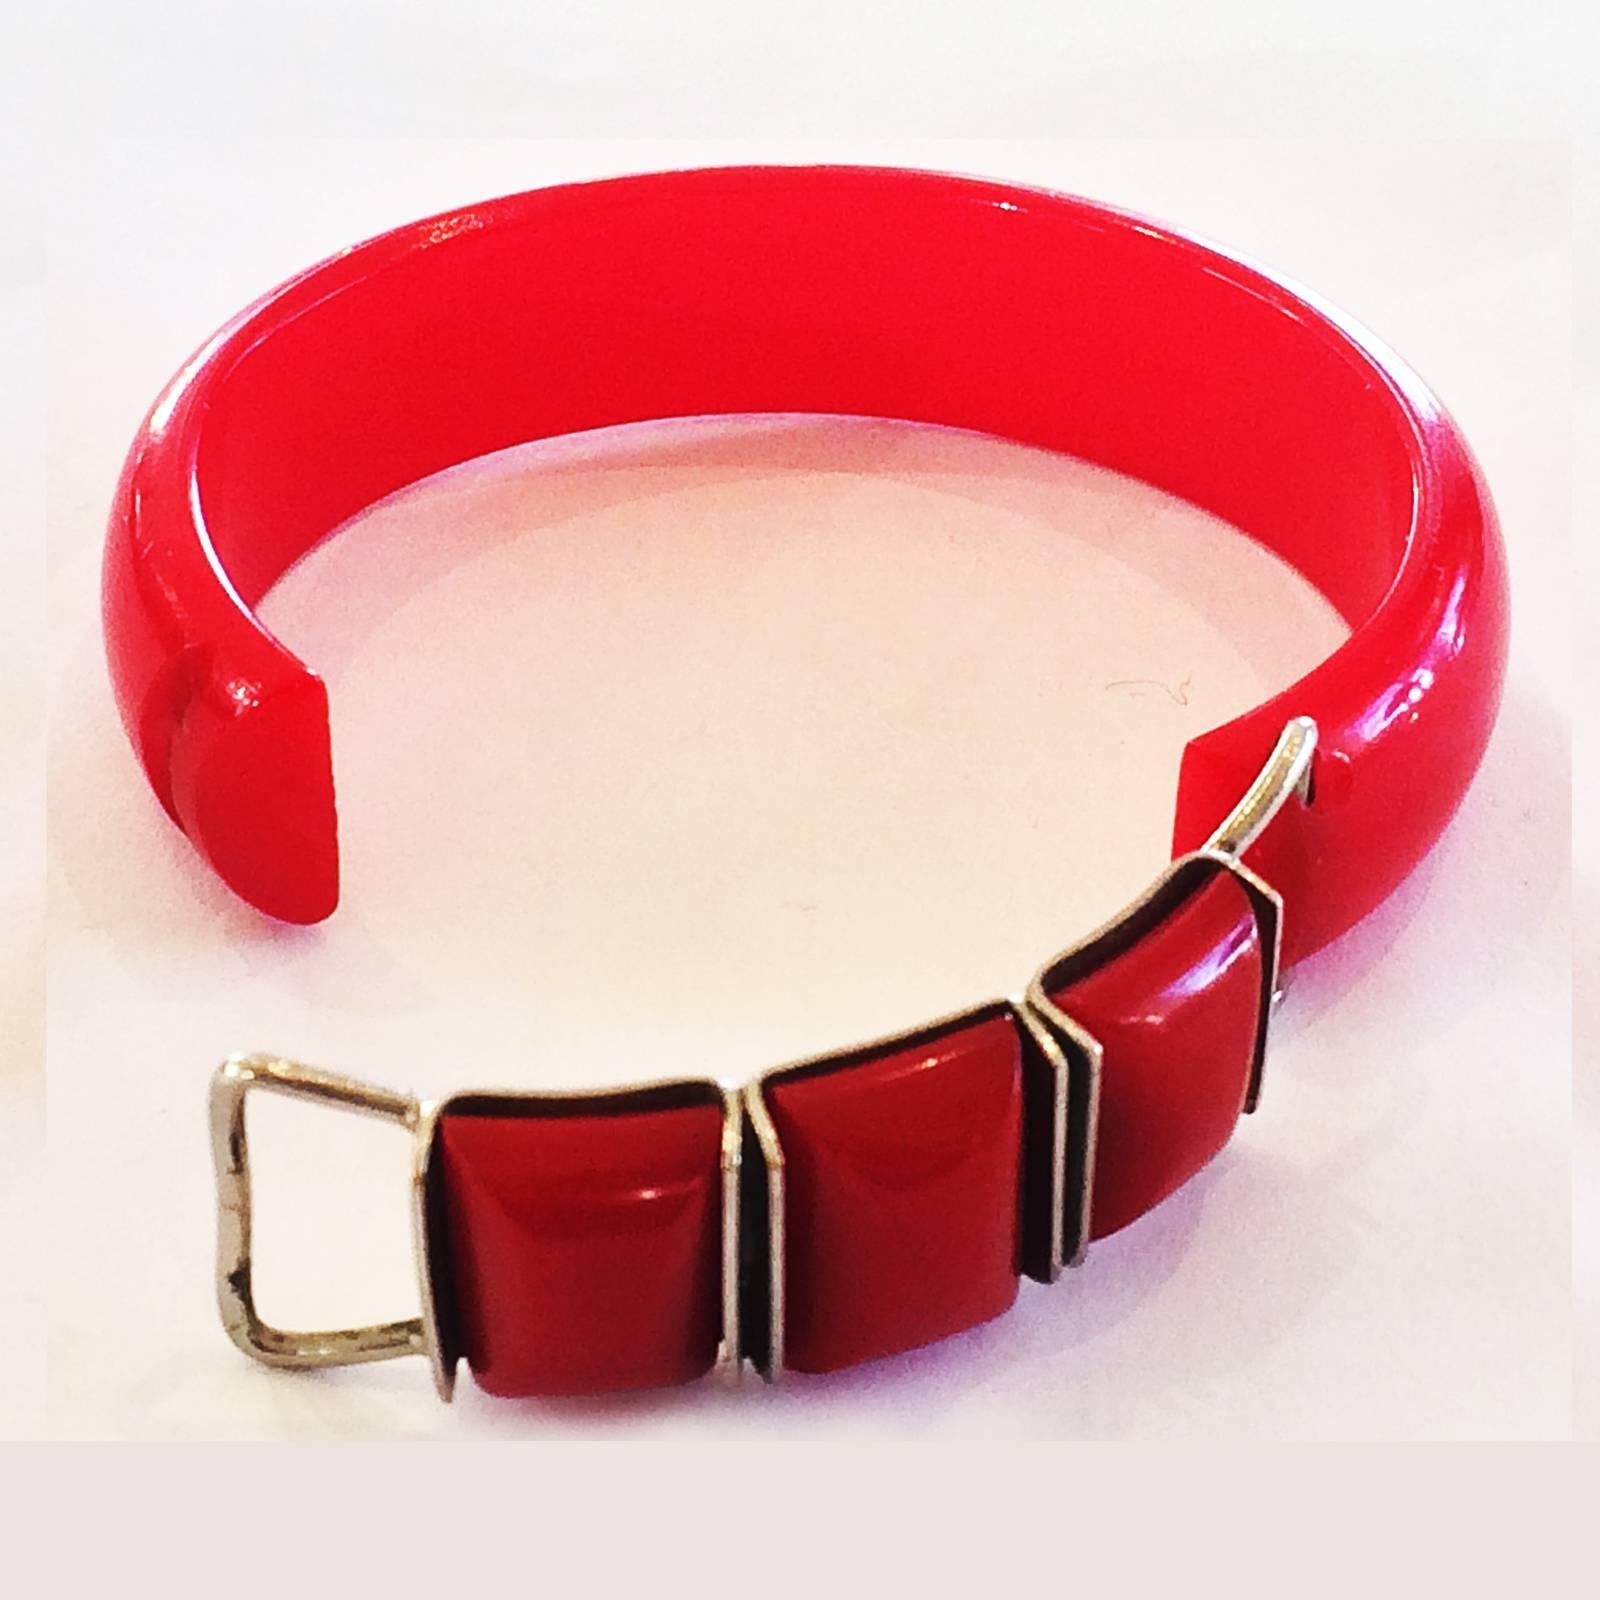 Art Deco Bangle in bright Lipstick  Red coloured Bakelite, with chromed “buckles” for decoration and also the clasp to open to place on your wrist. Very rare design with this operation. All in perfect condition, with no damage, repairs or losses at